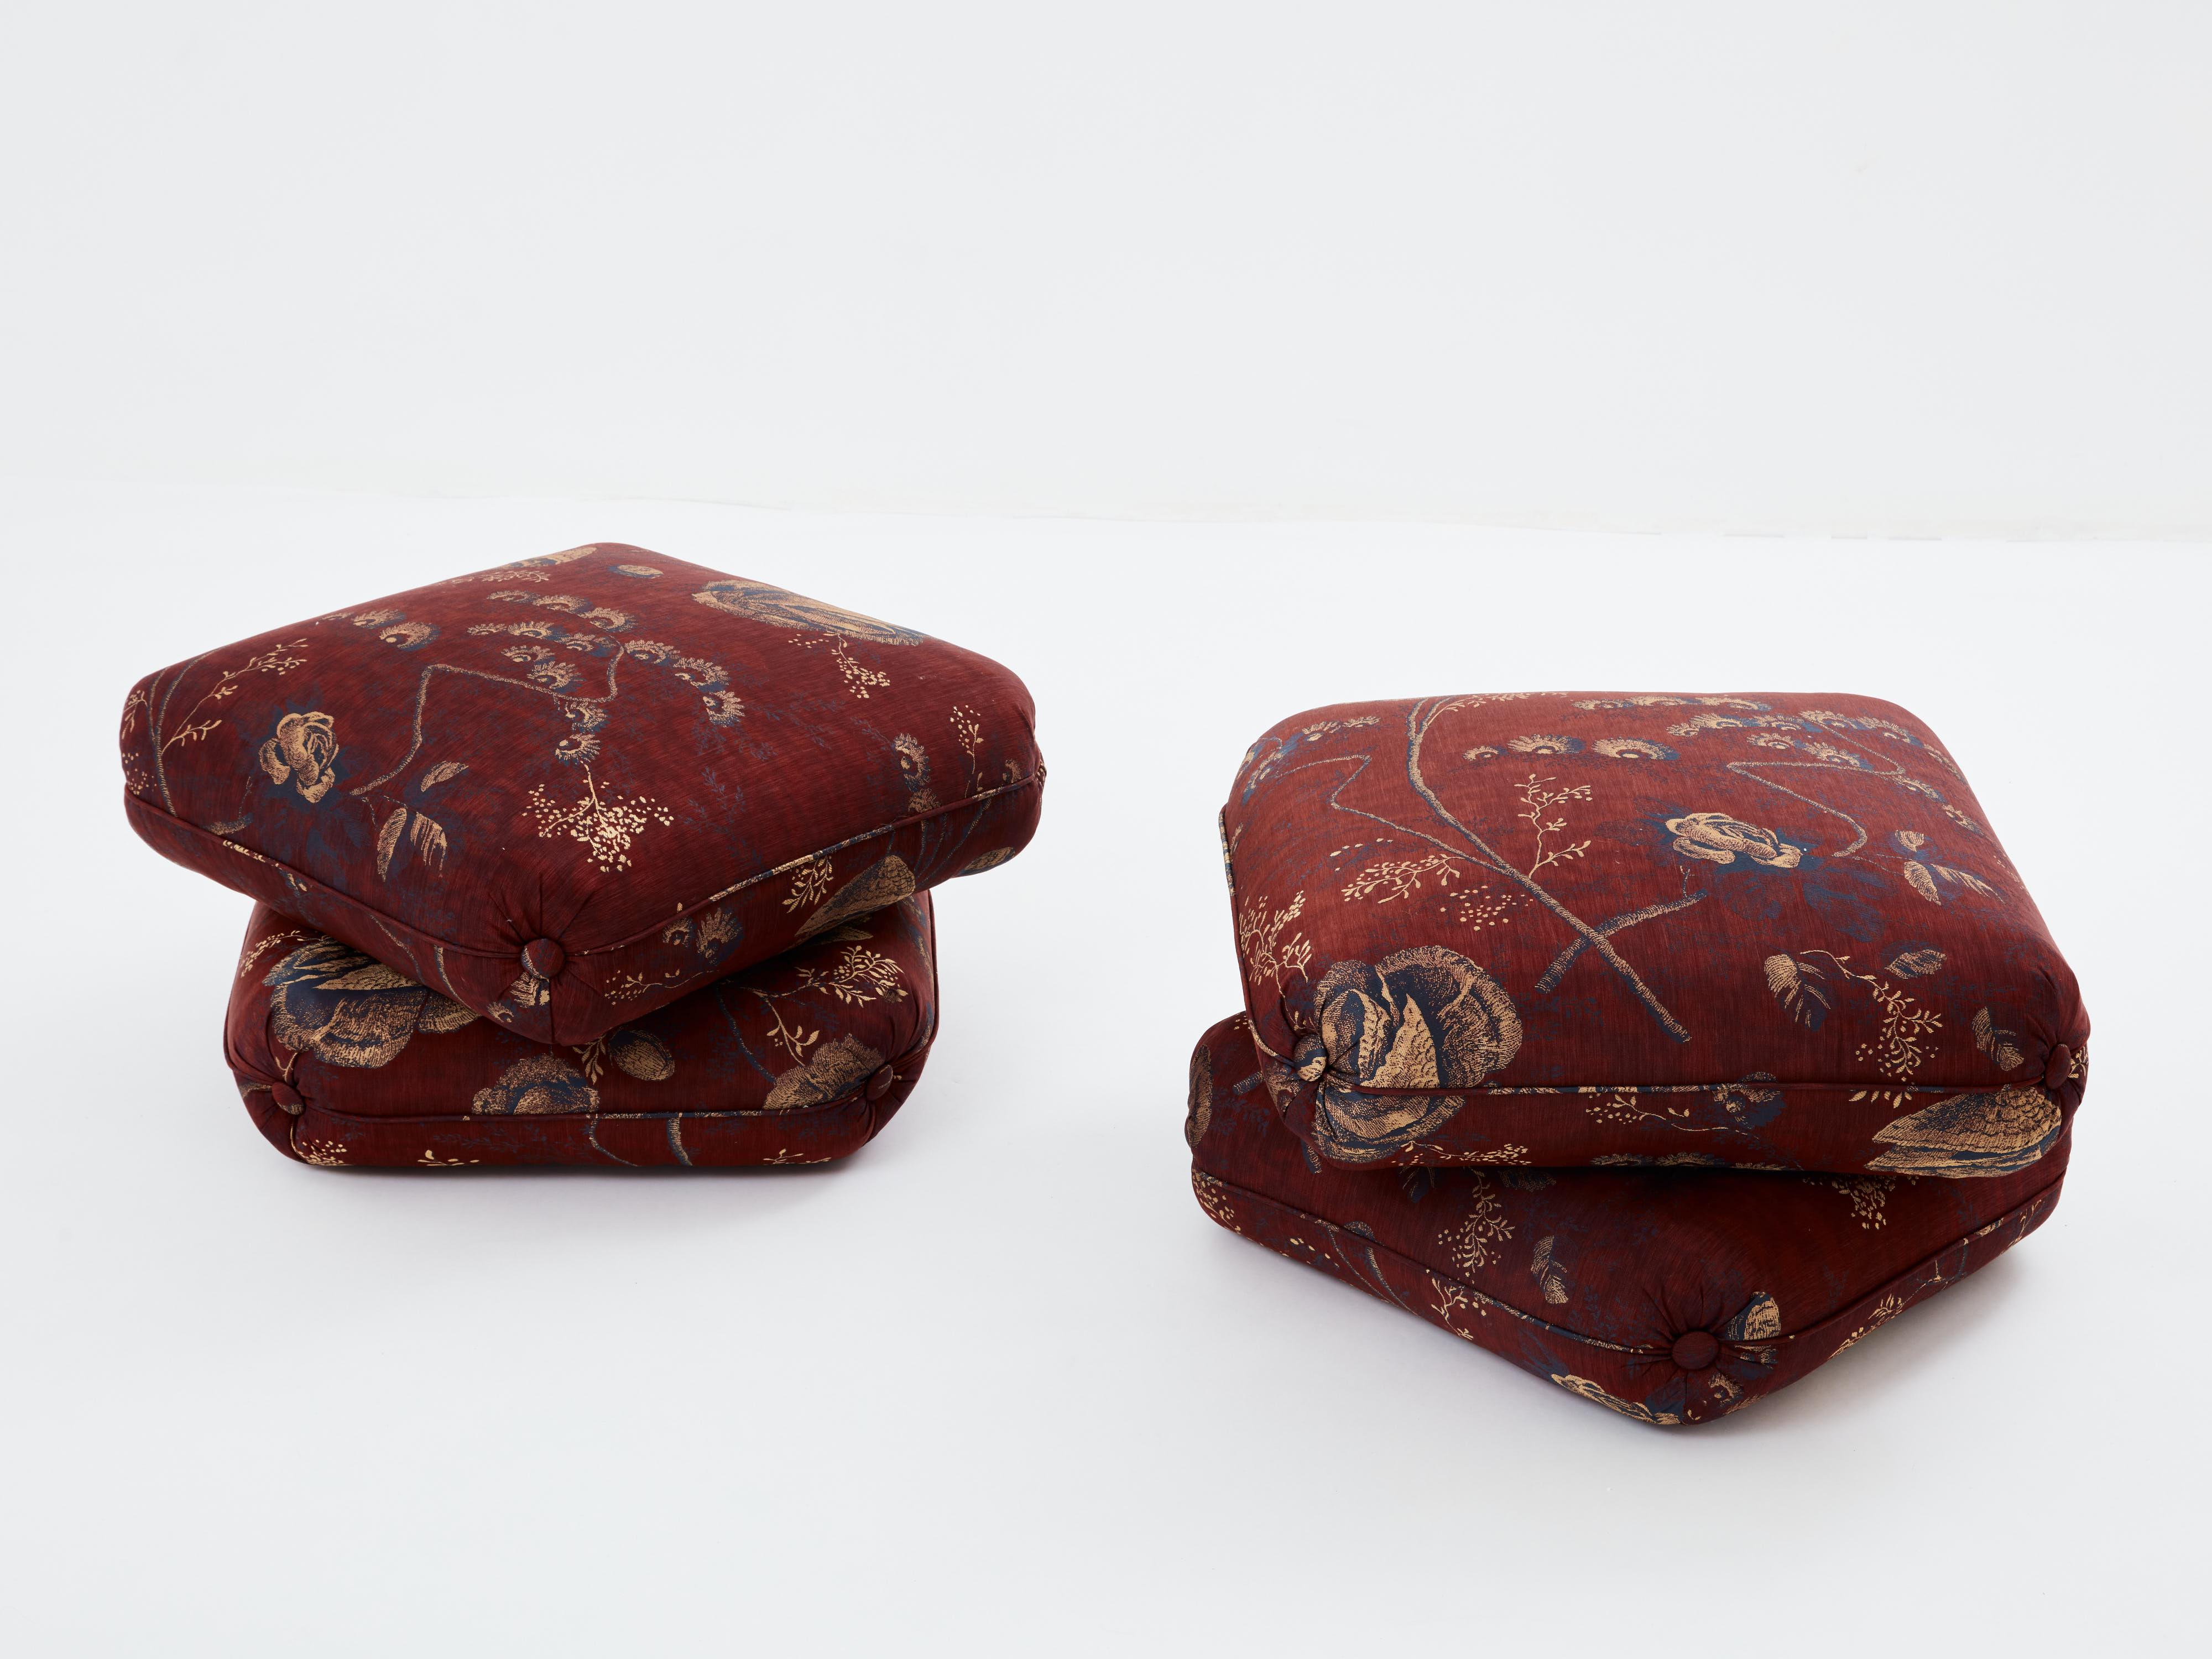 Beautiful pair of ottomans or stools by French Designer Jacques Charpentier for Maison Jansen designed in the 1970s. The pair of ottomans are made of two large cushion elements connected together. They have been newly upholstered with a beautiful